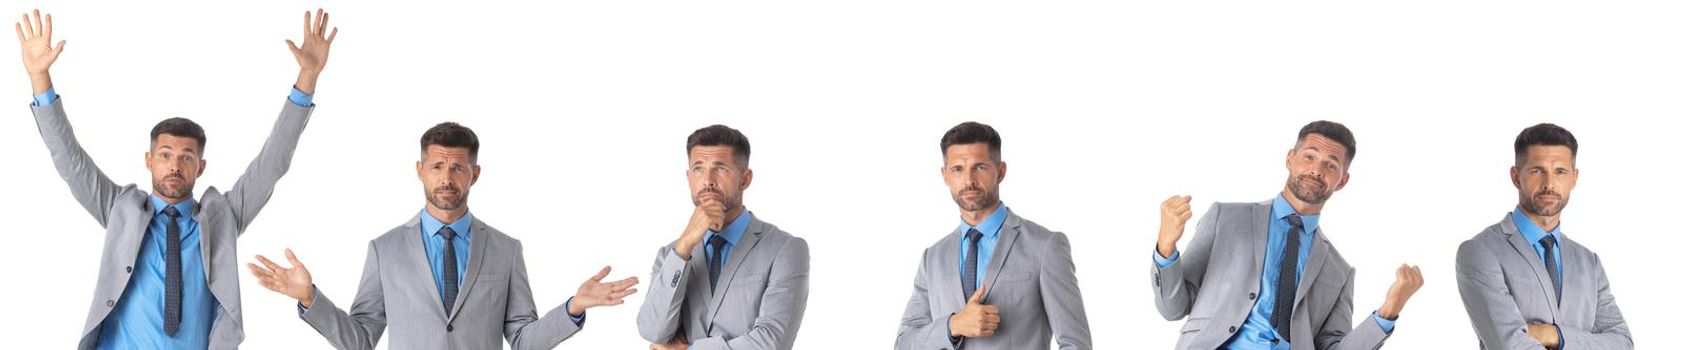 Set collection of portraits of one handsome business man showing different emotions isolated on white background